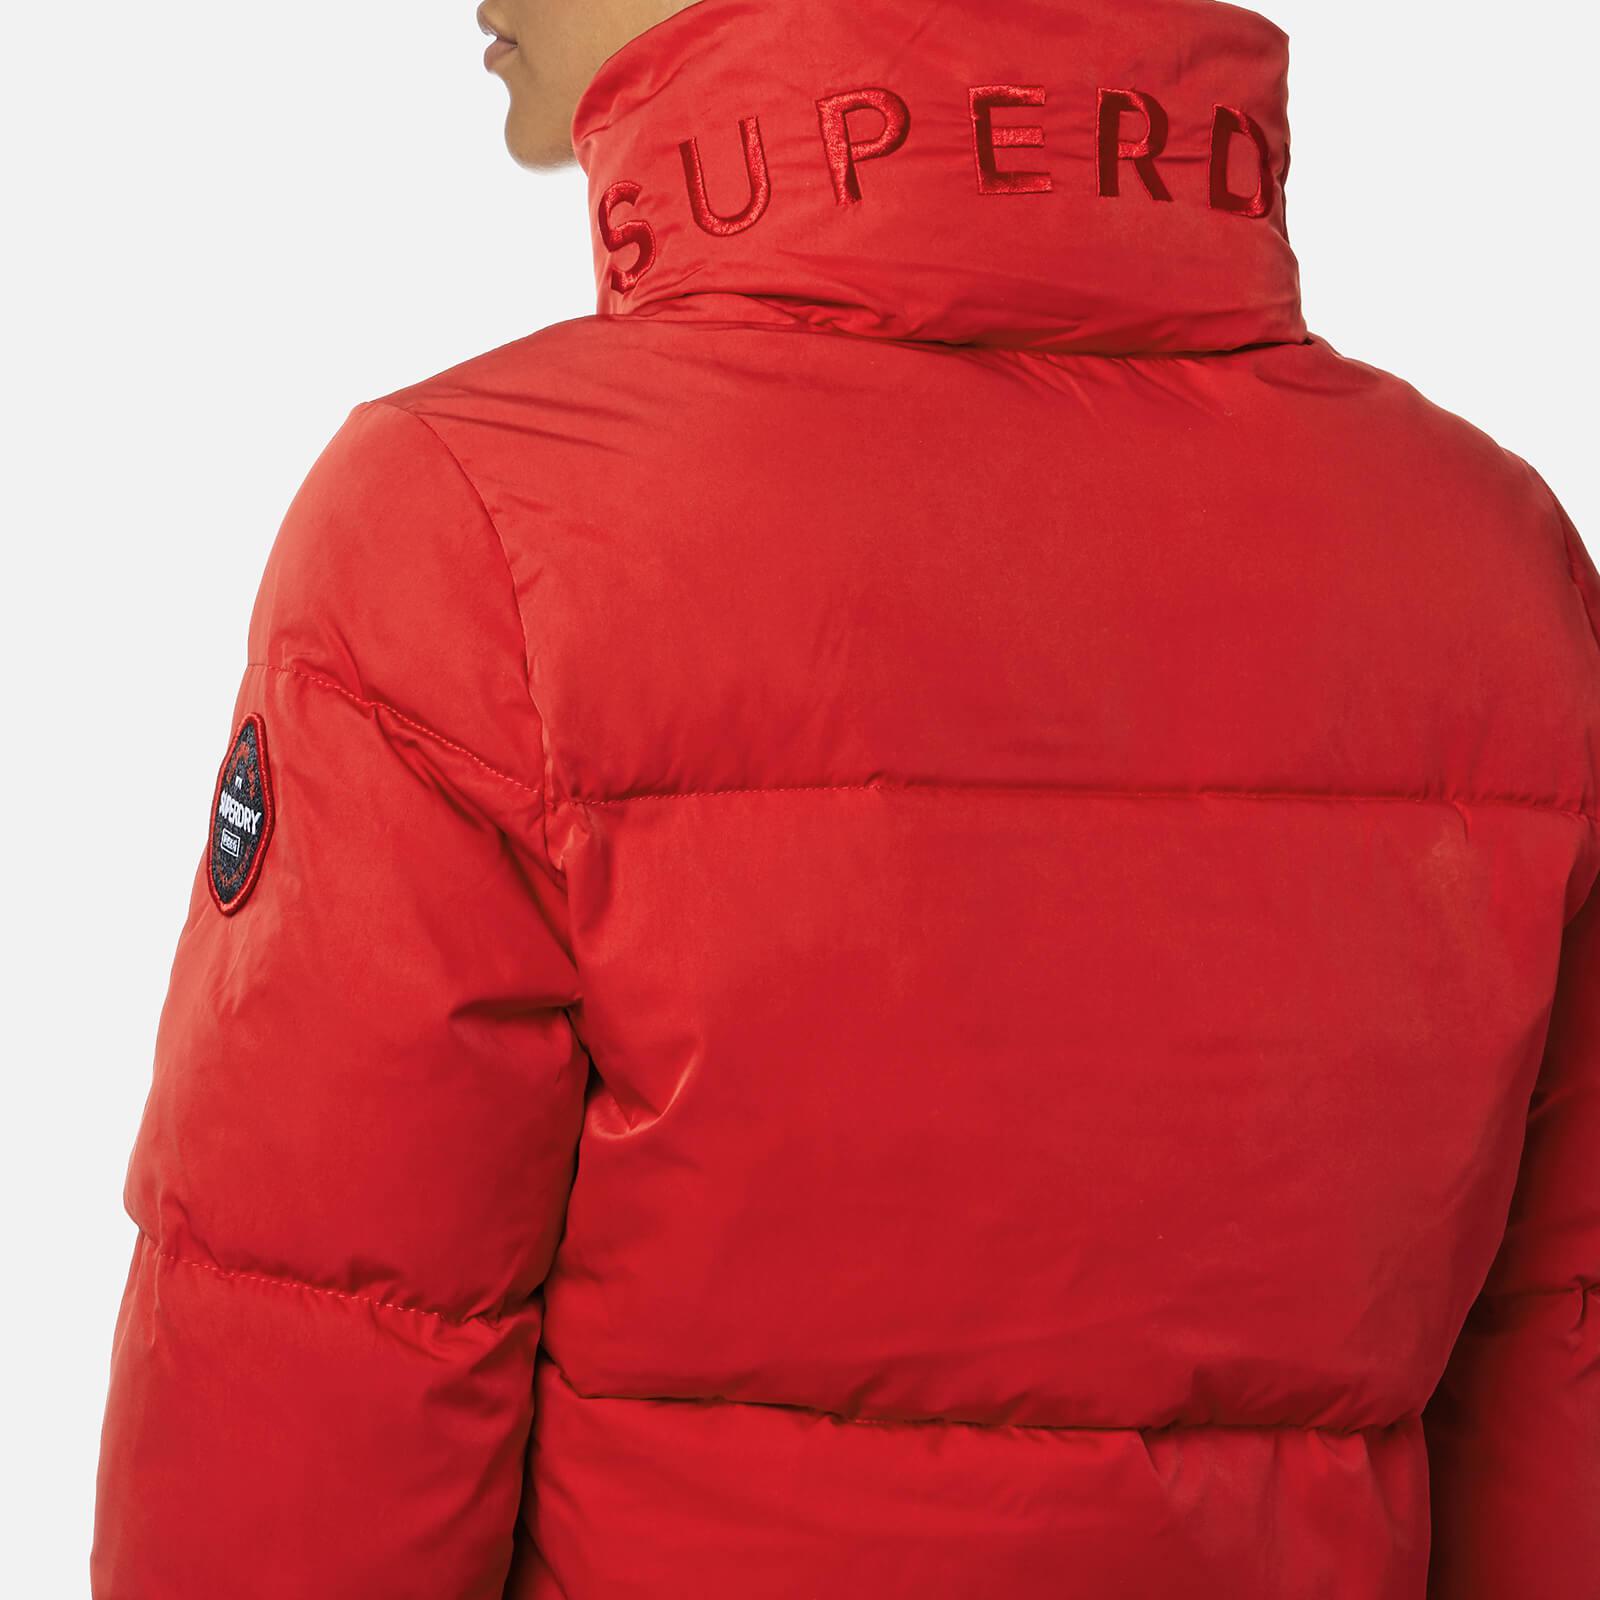 Superdry Cocoon Jacket in Red - Lyst